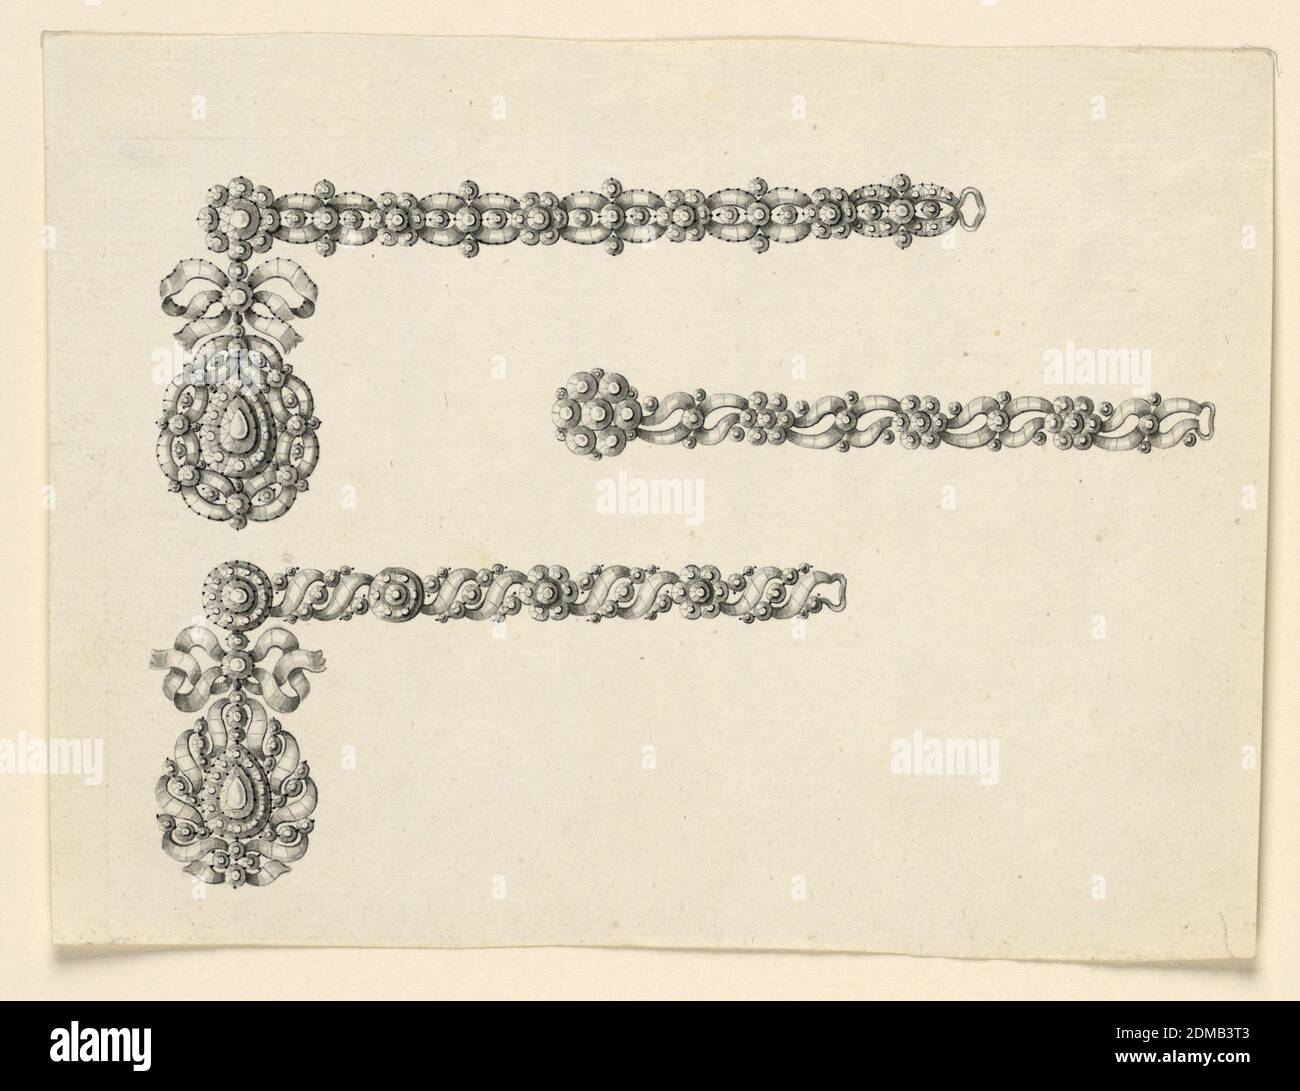 Designs for Two Necklaces and a Chain, Pen and black ink, brush and gray watercolor on paper, Jewelry designs for two necklaces and a chain. The right sides, each below the other. Above, the chain consists of entwined bands, connected by blossoms; hanging on a knot a drop framed by the entwined bands. The chain consists of entwined scrolls, connected by blossoms; below, a scroll of loosely flowing ribbon is connected by disks; hanging on a knot, framed by the ribbon scrolls, having the shape of a palmette., probably Naples, South Italy, Italy, late 18th century, jewelry, Drawing Stock Photo